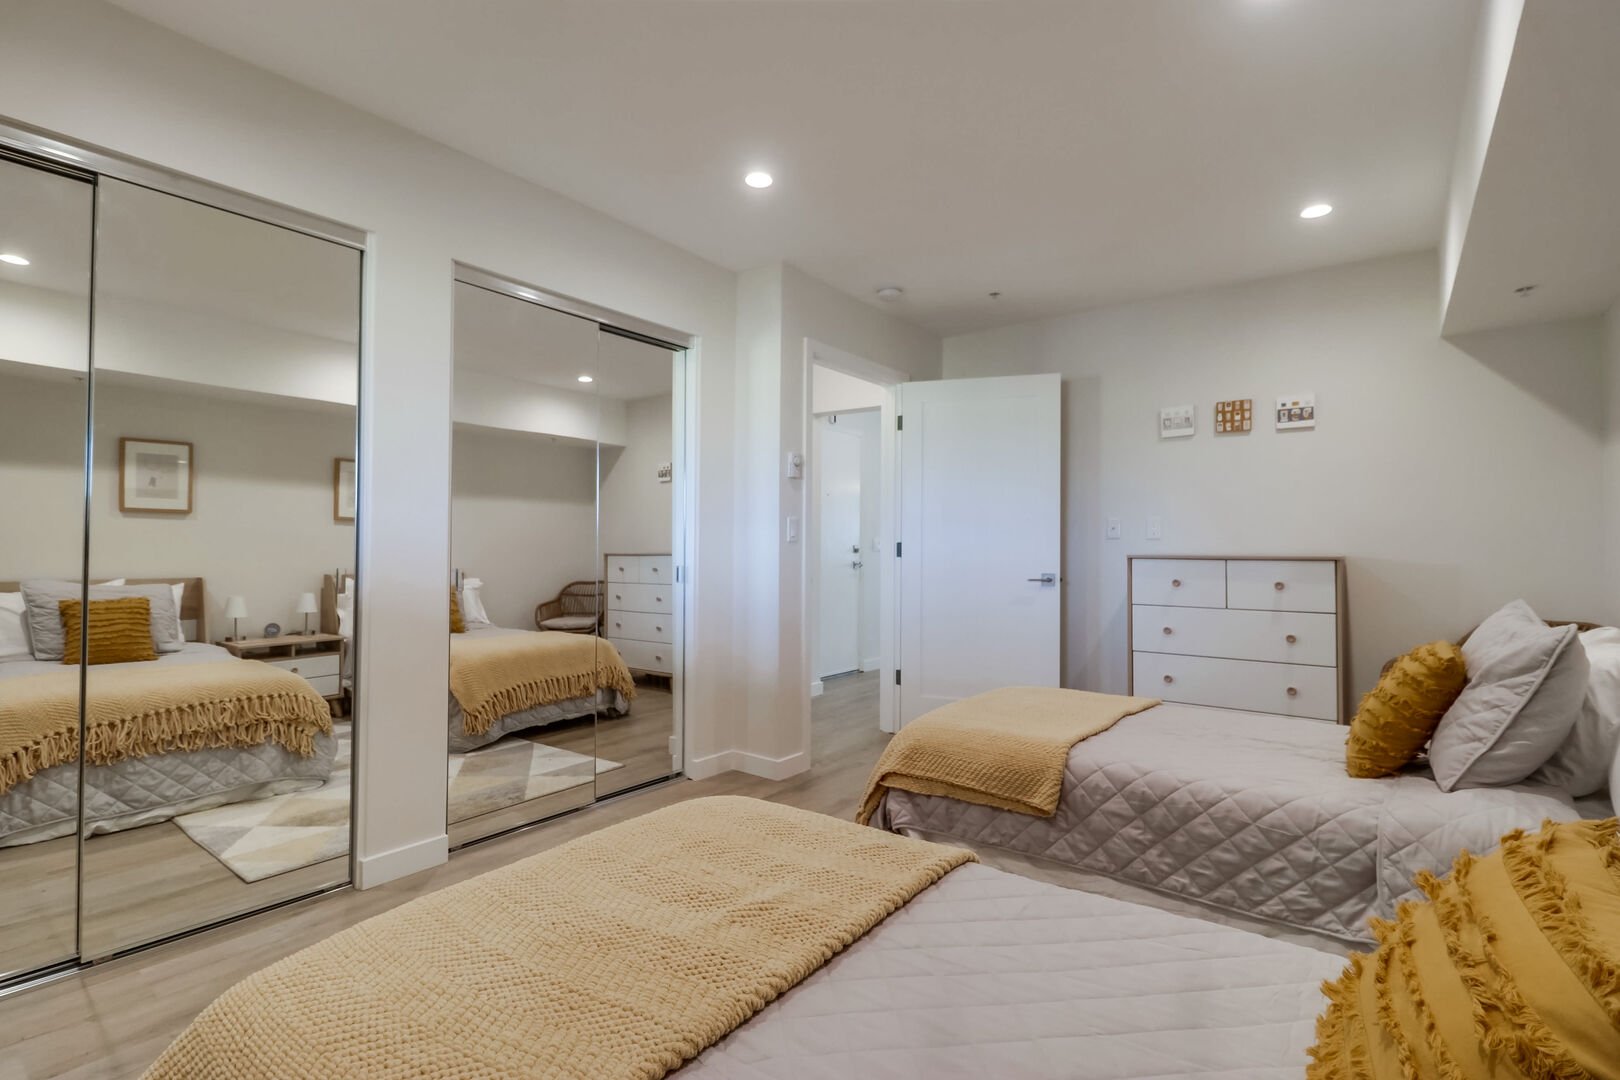 Guest bedroom with 2 twin beds and ample storage and dresser space. Large closets come with iron, ironing board, step stool, cleaning equipment (such as vacuum, mop, broom) hangers and beach accessories.